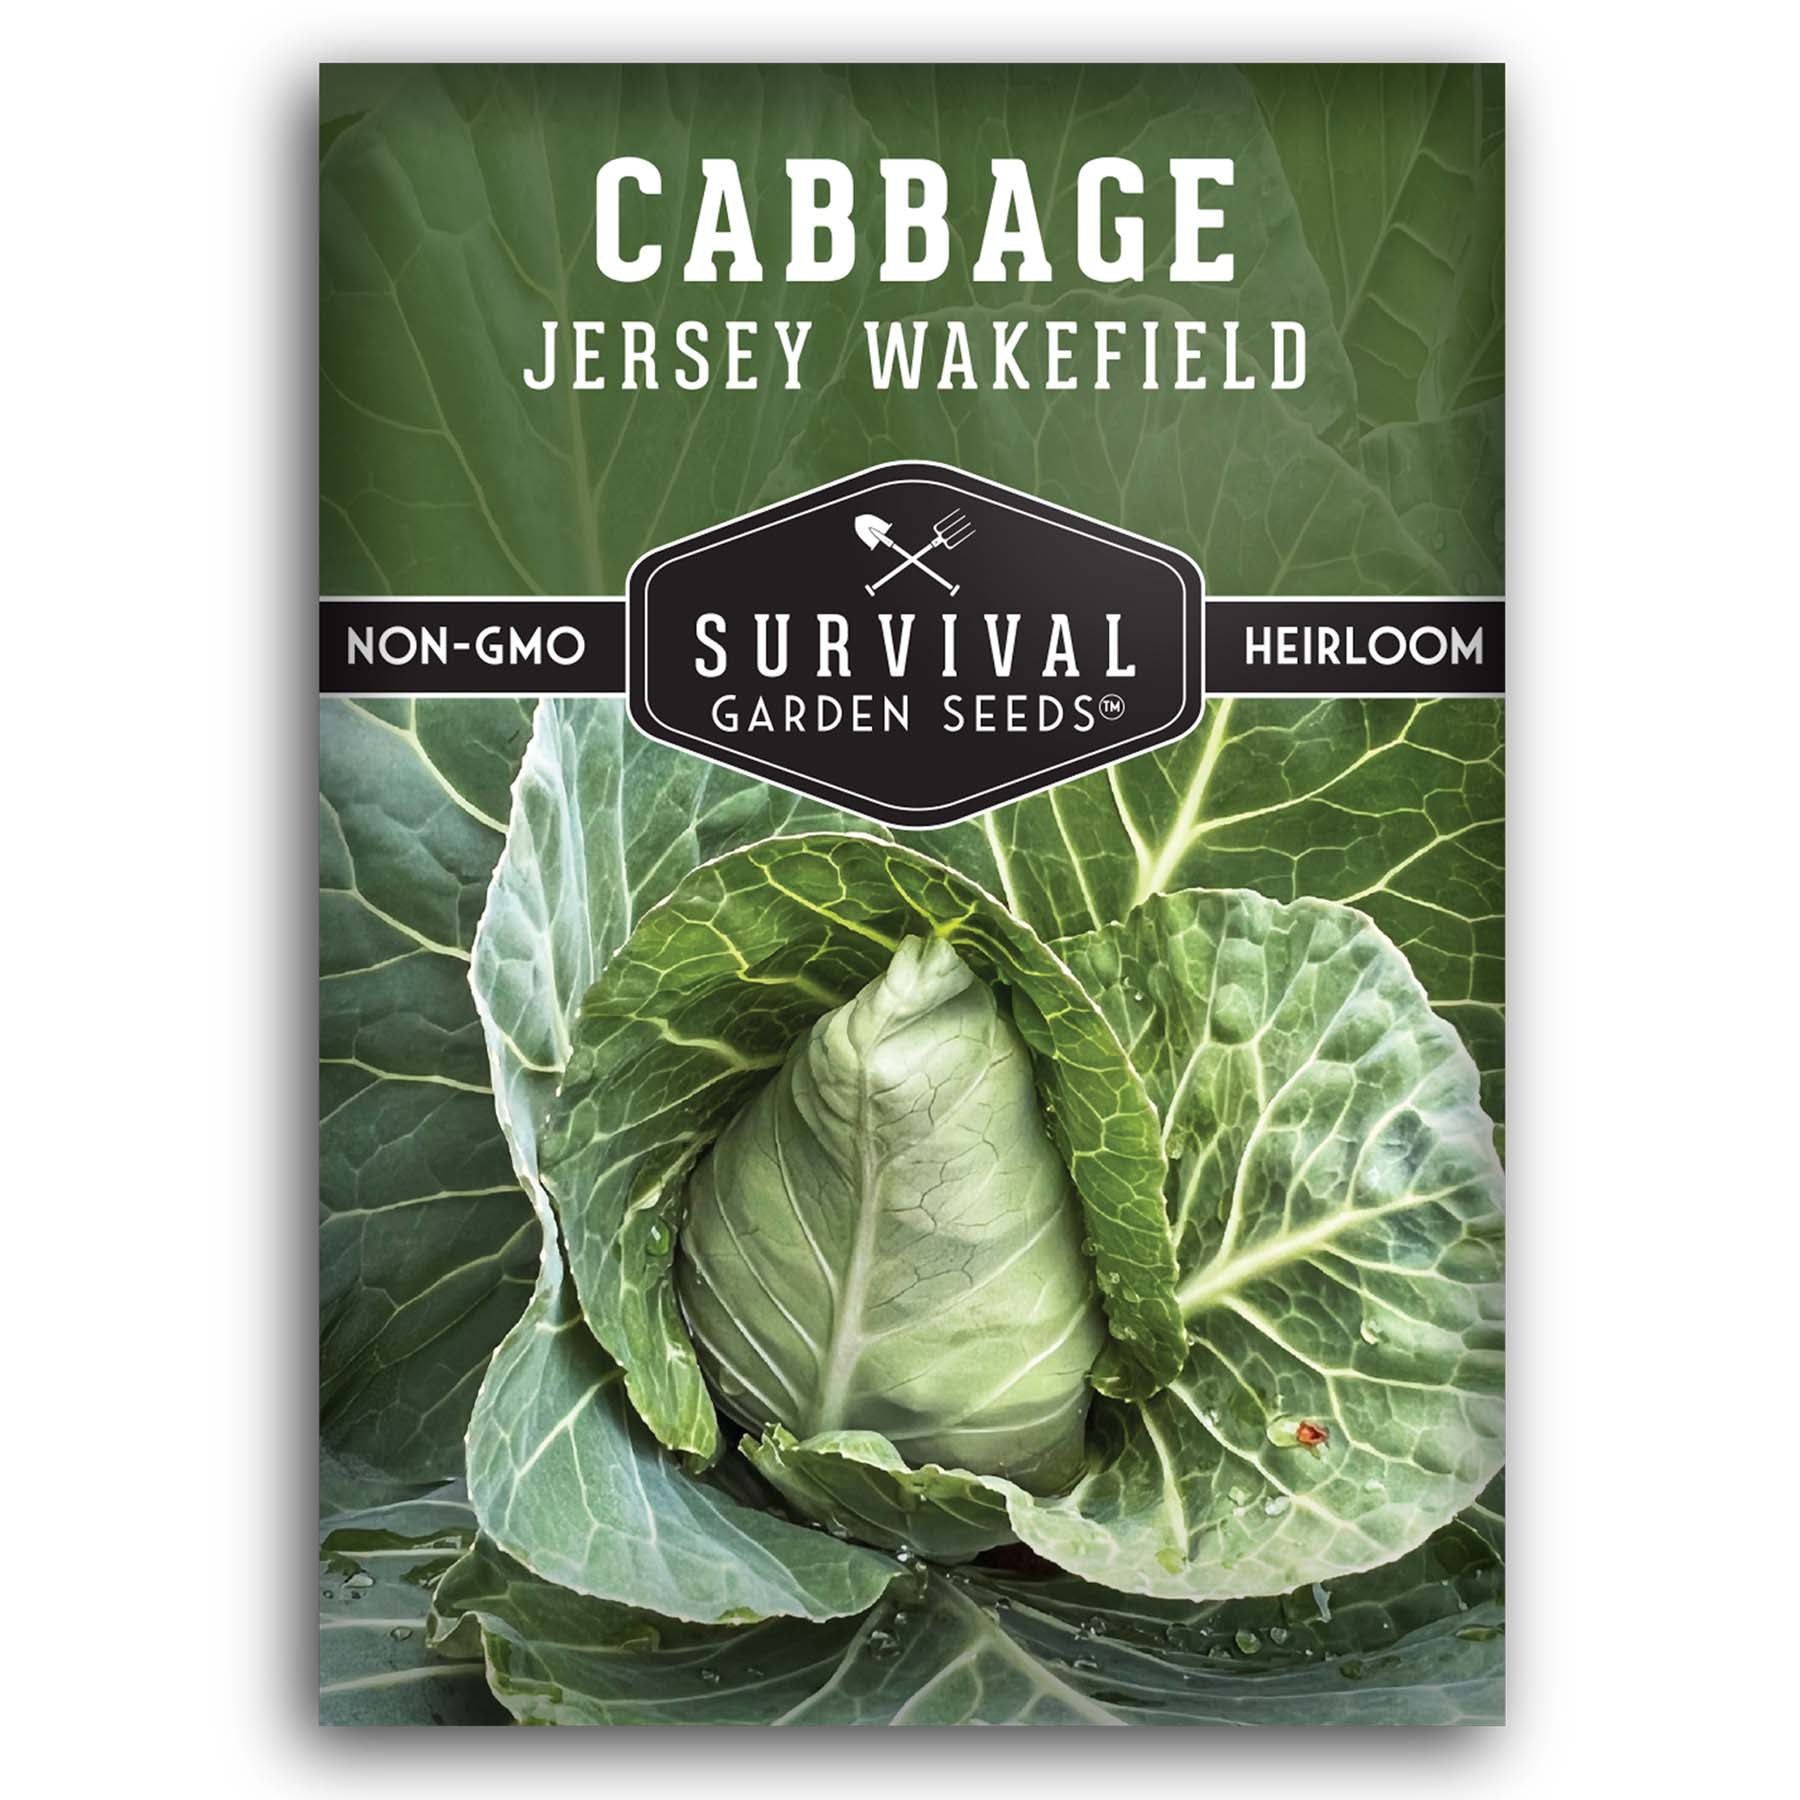 Jersey Wakefield Cabbage seeds for planting